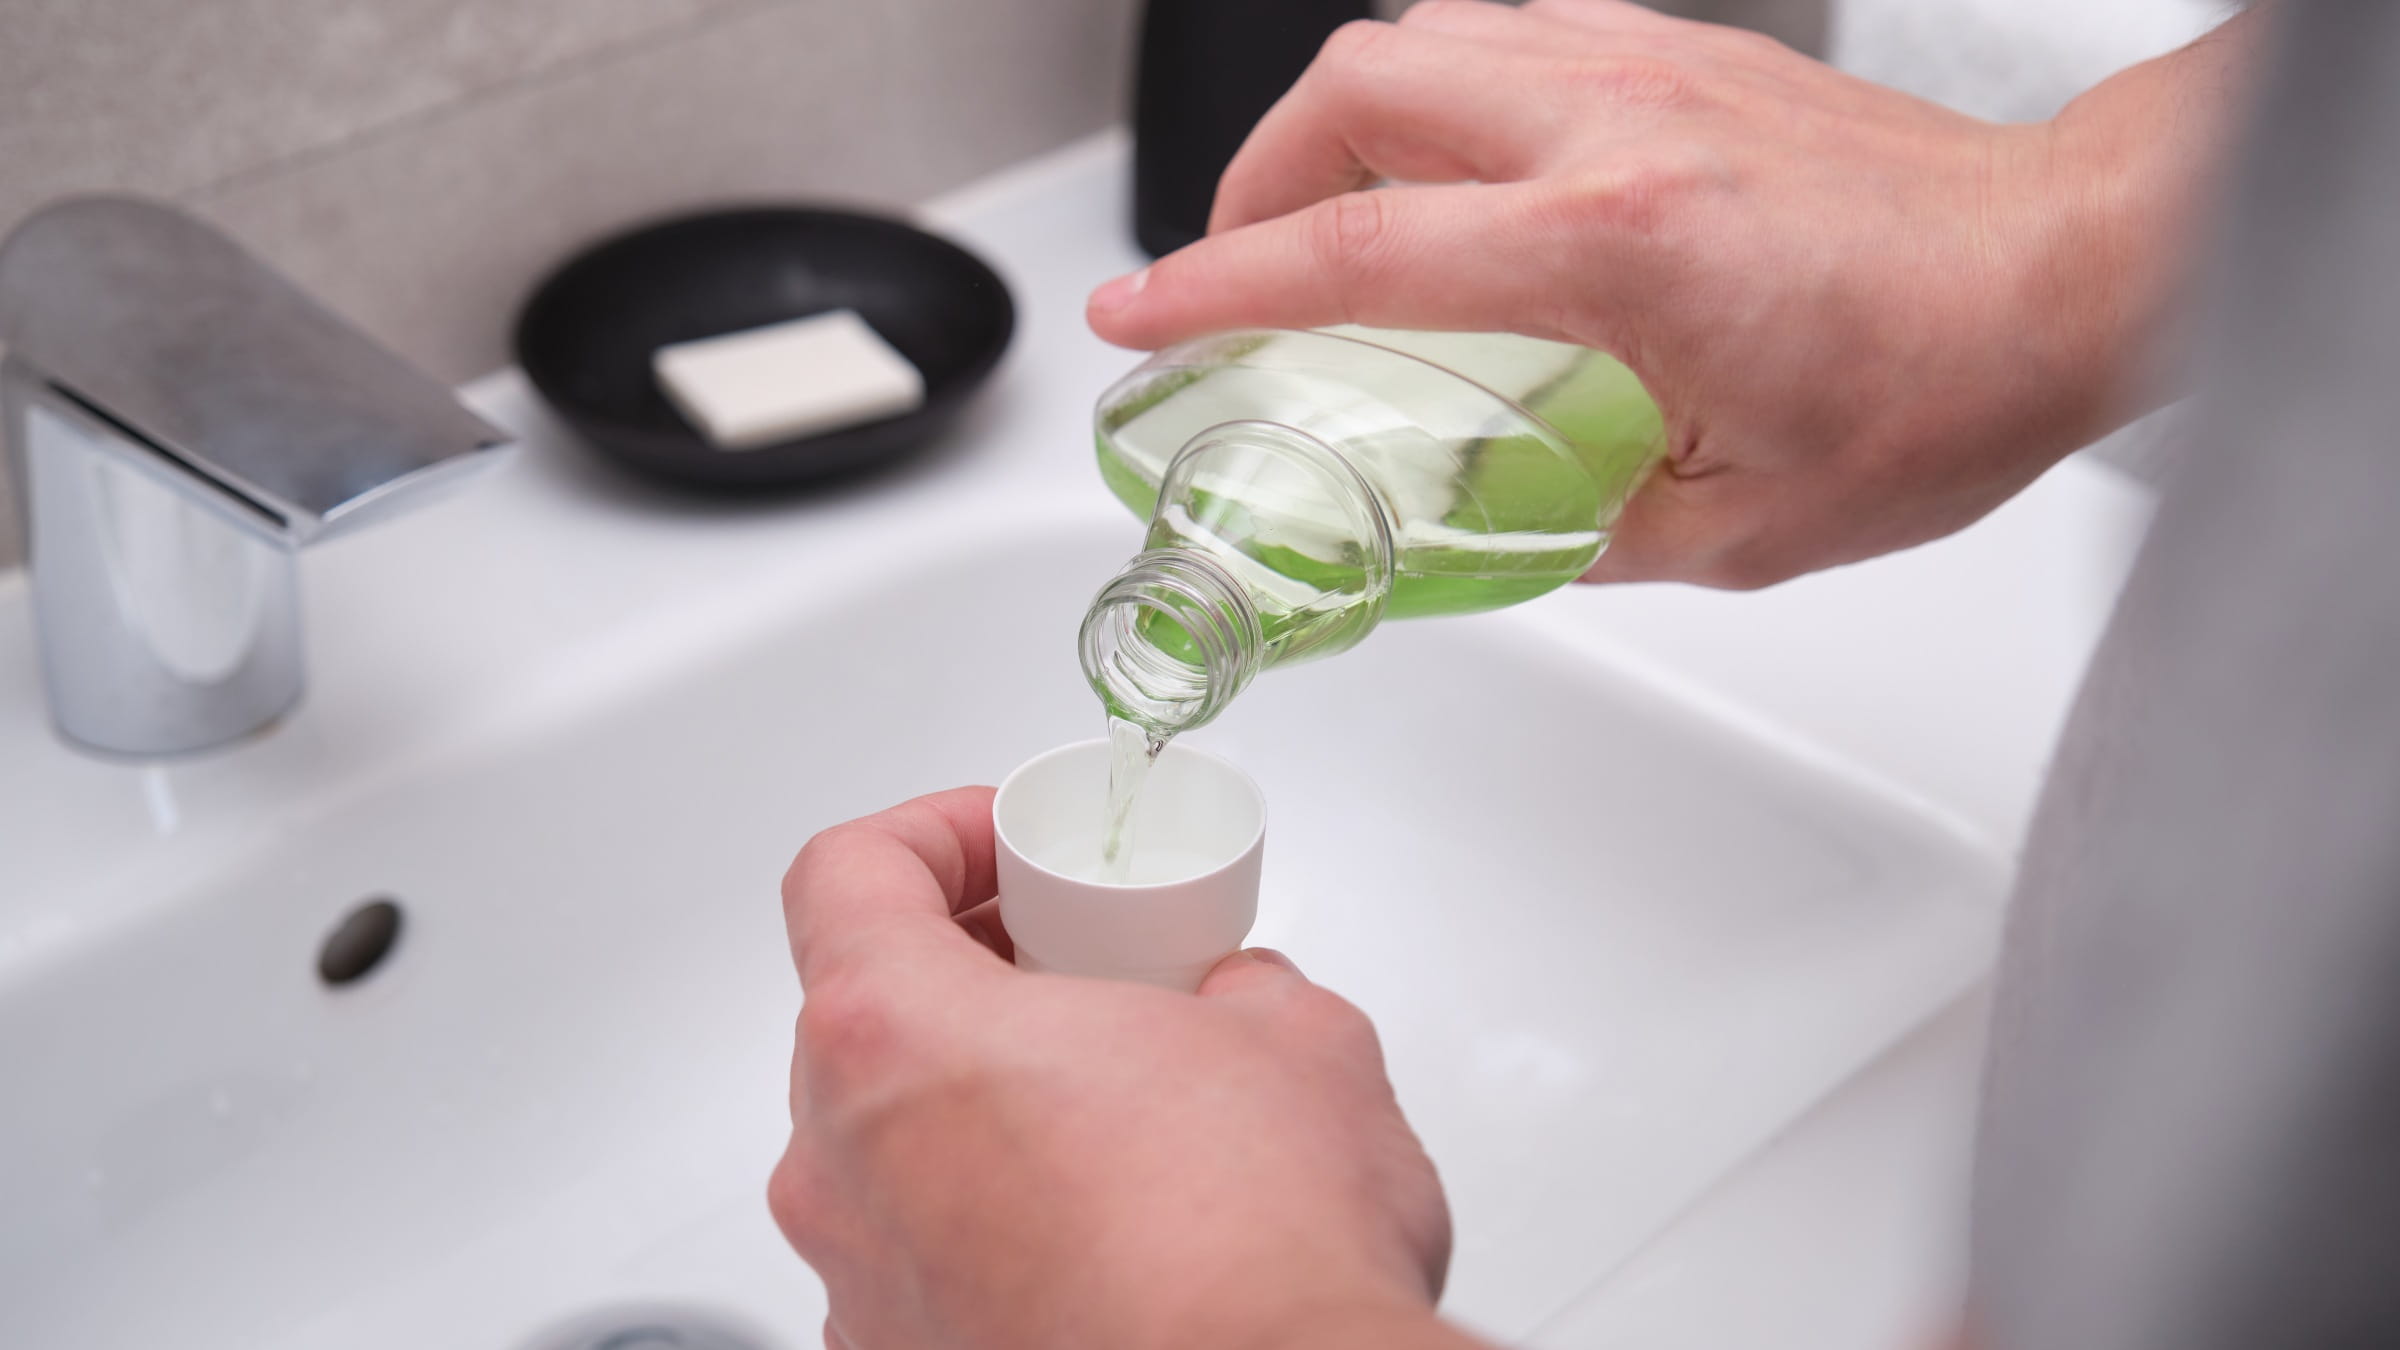 Man pouring mouthwash from a bottle into a cap in the bathroom